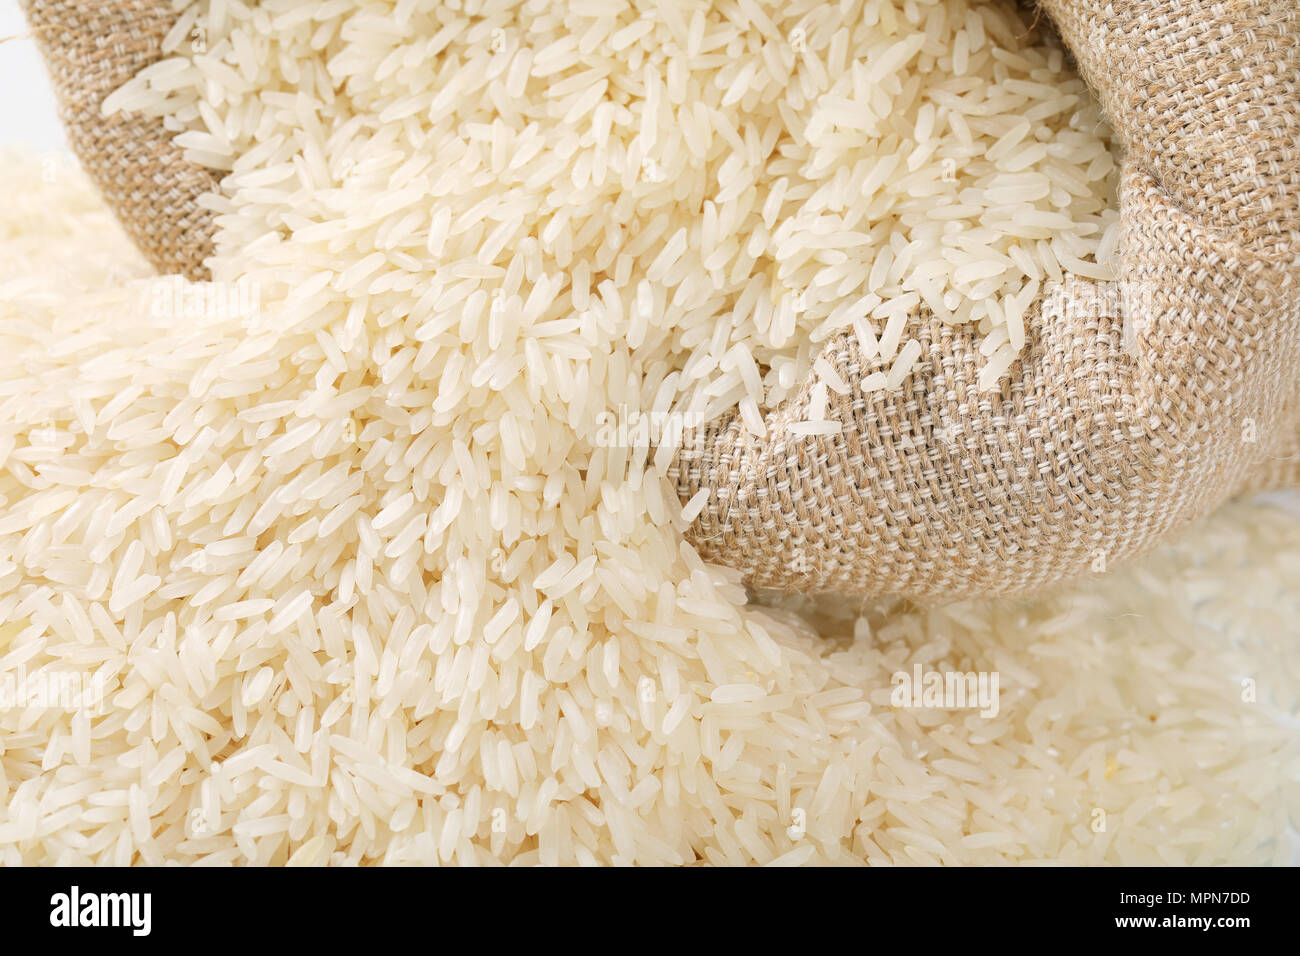 bag and pile of white long grained rice - detail Stock Photo